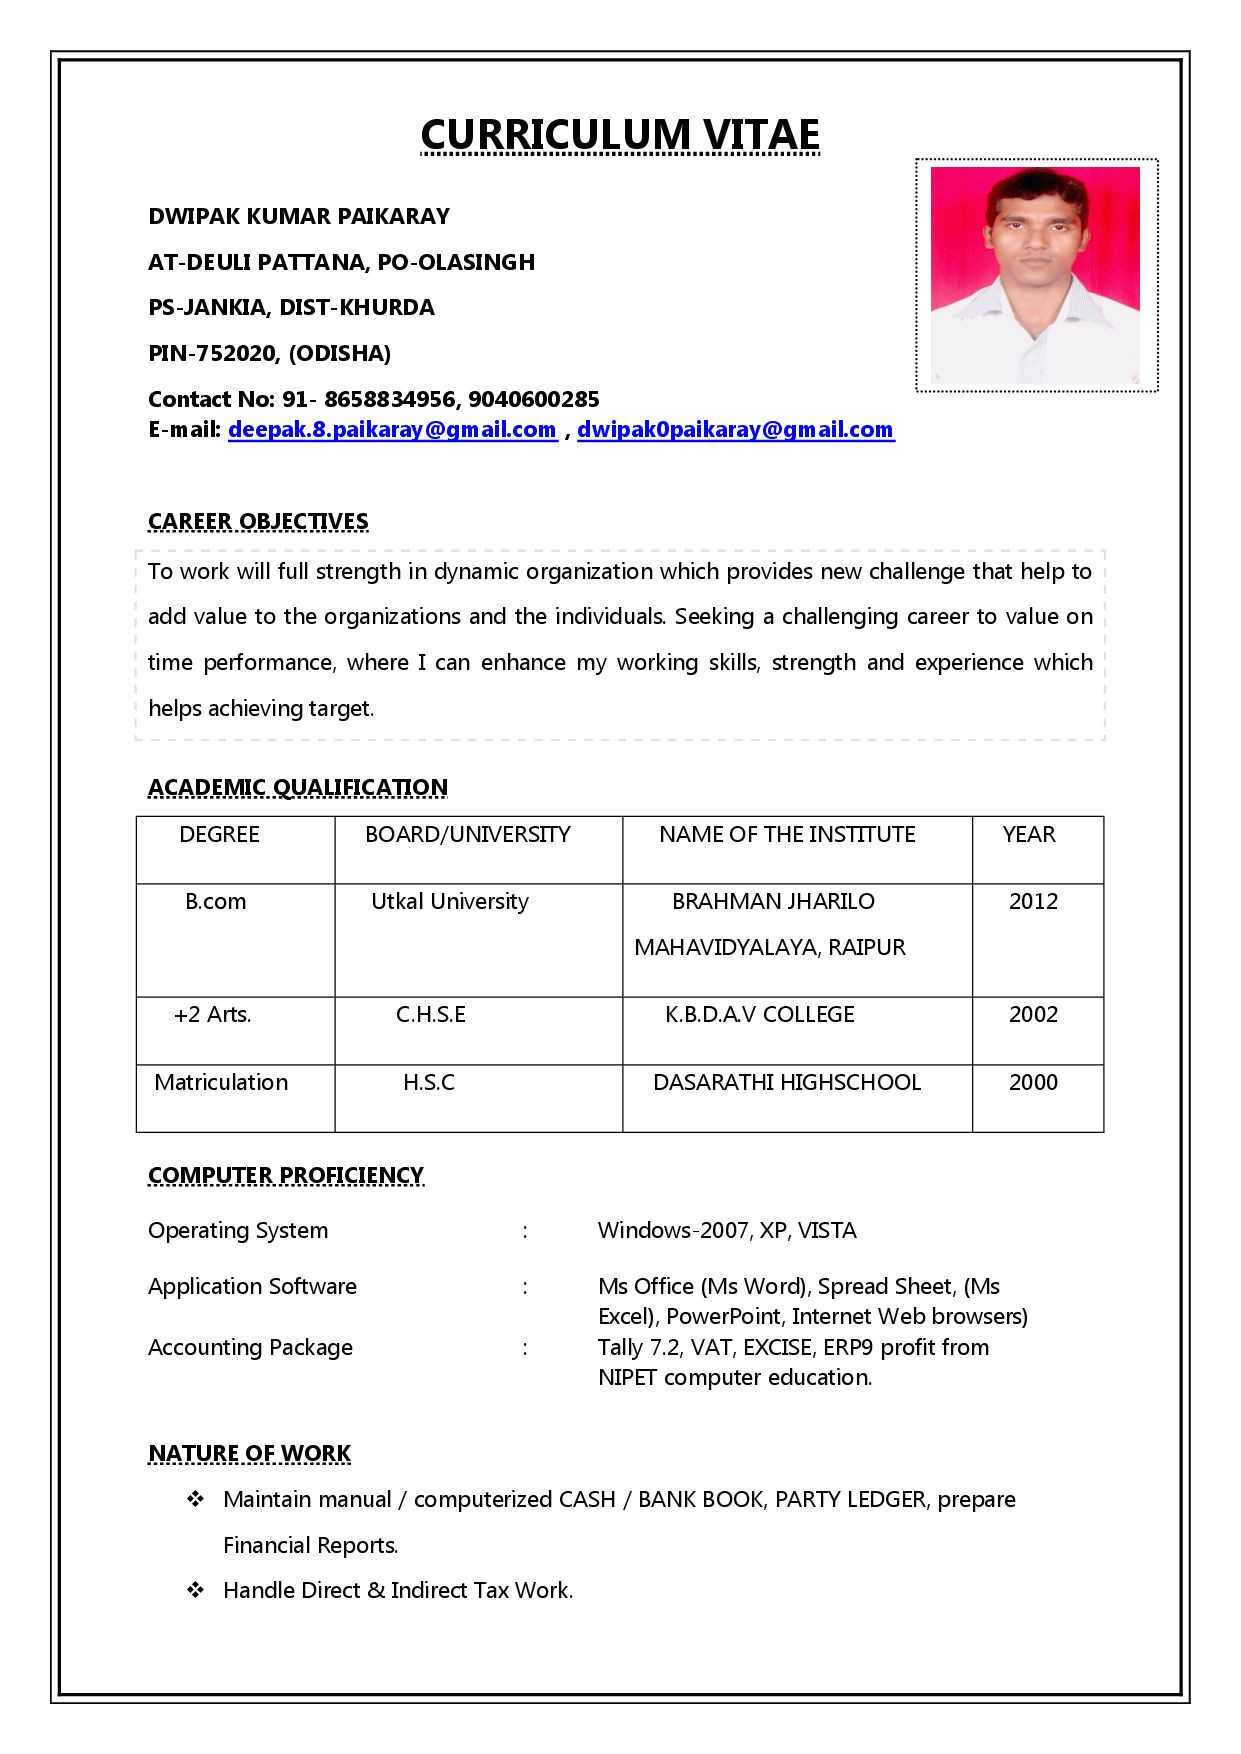 How to Create A Resume for Job Interview Job Interview 3 Resume format Job Resume format